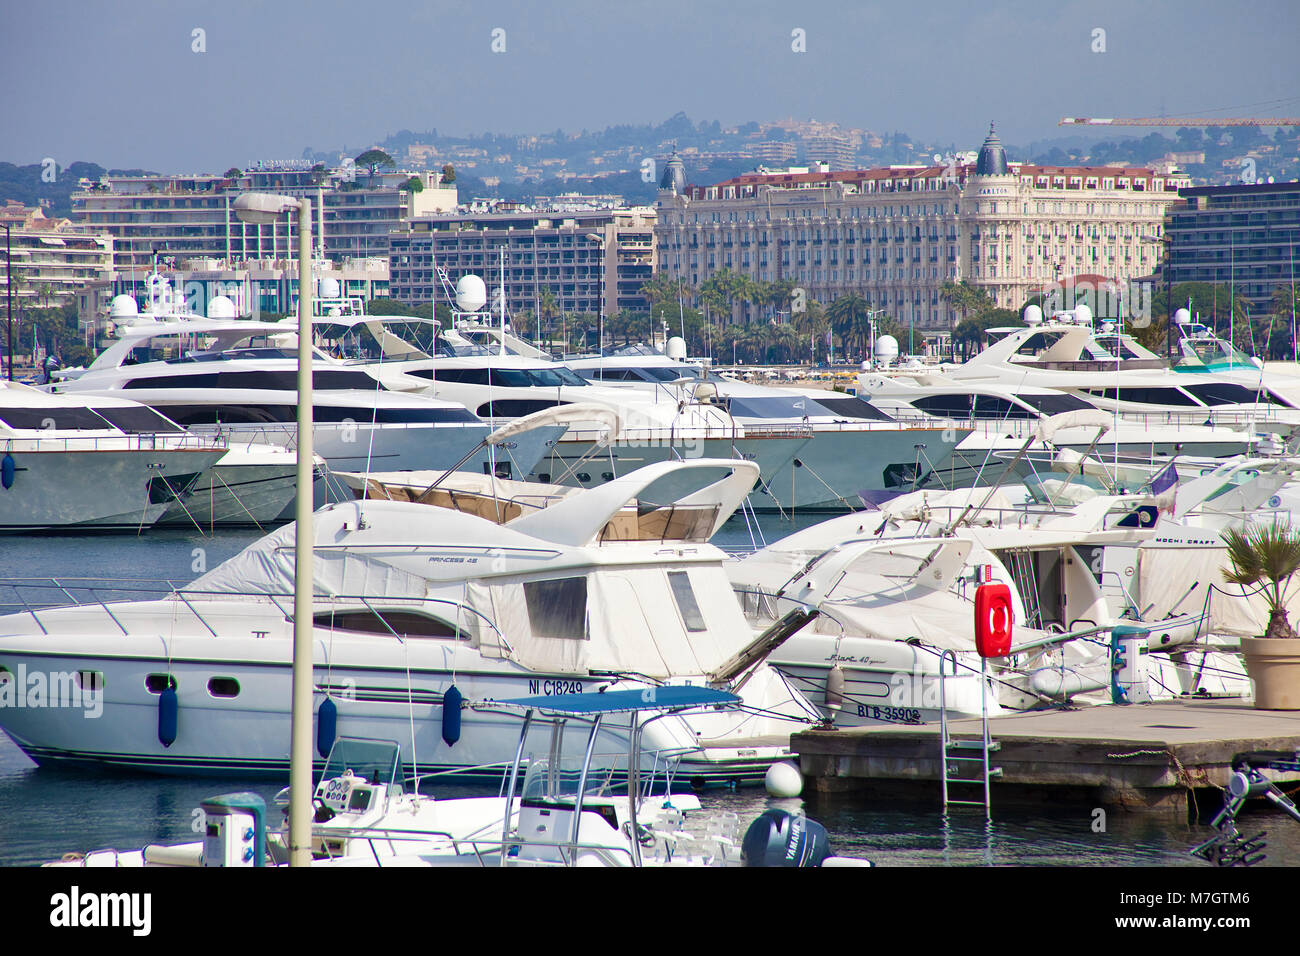 Luxury yachts at marina, at background the luxury hotel 'Hotel Carlton Intercontinental', Cannes, french riviera, South France, France, Europe Stock Photo